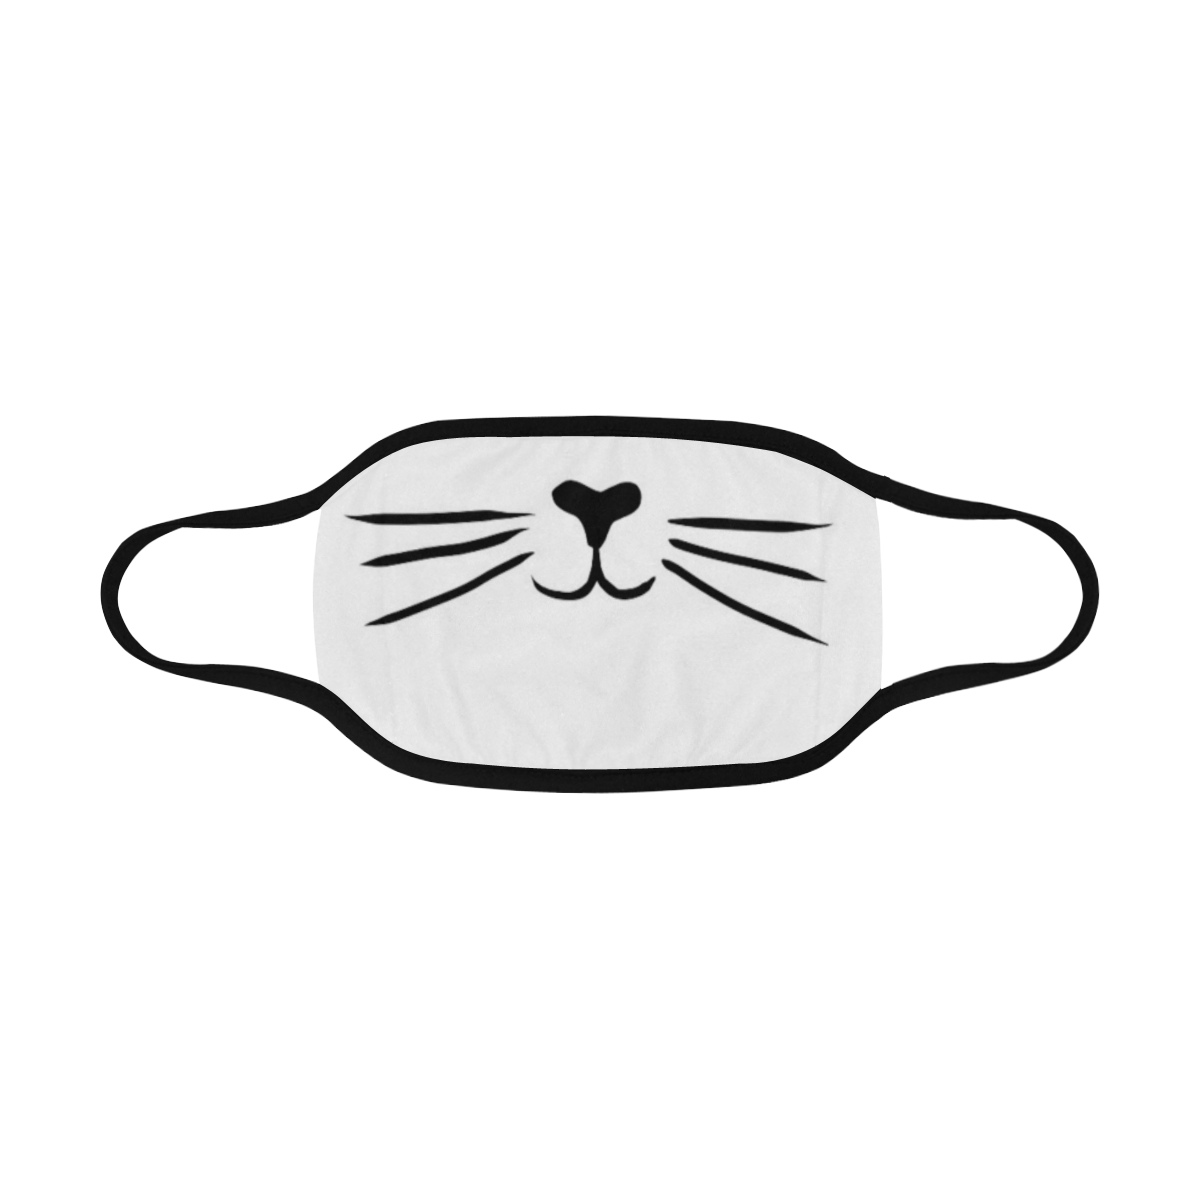 catface4 Mouth Mask